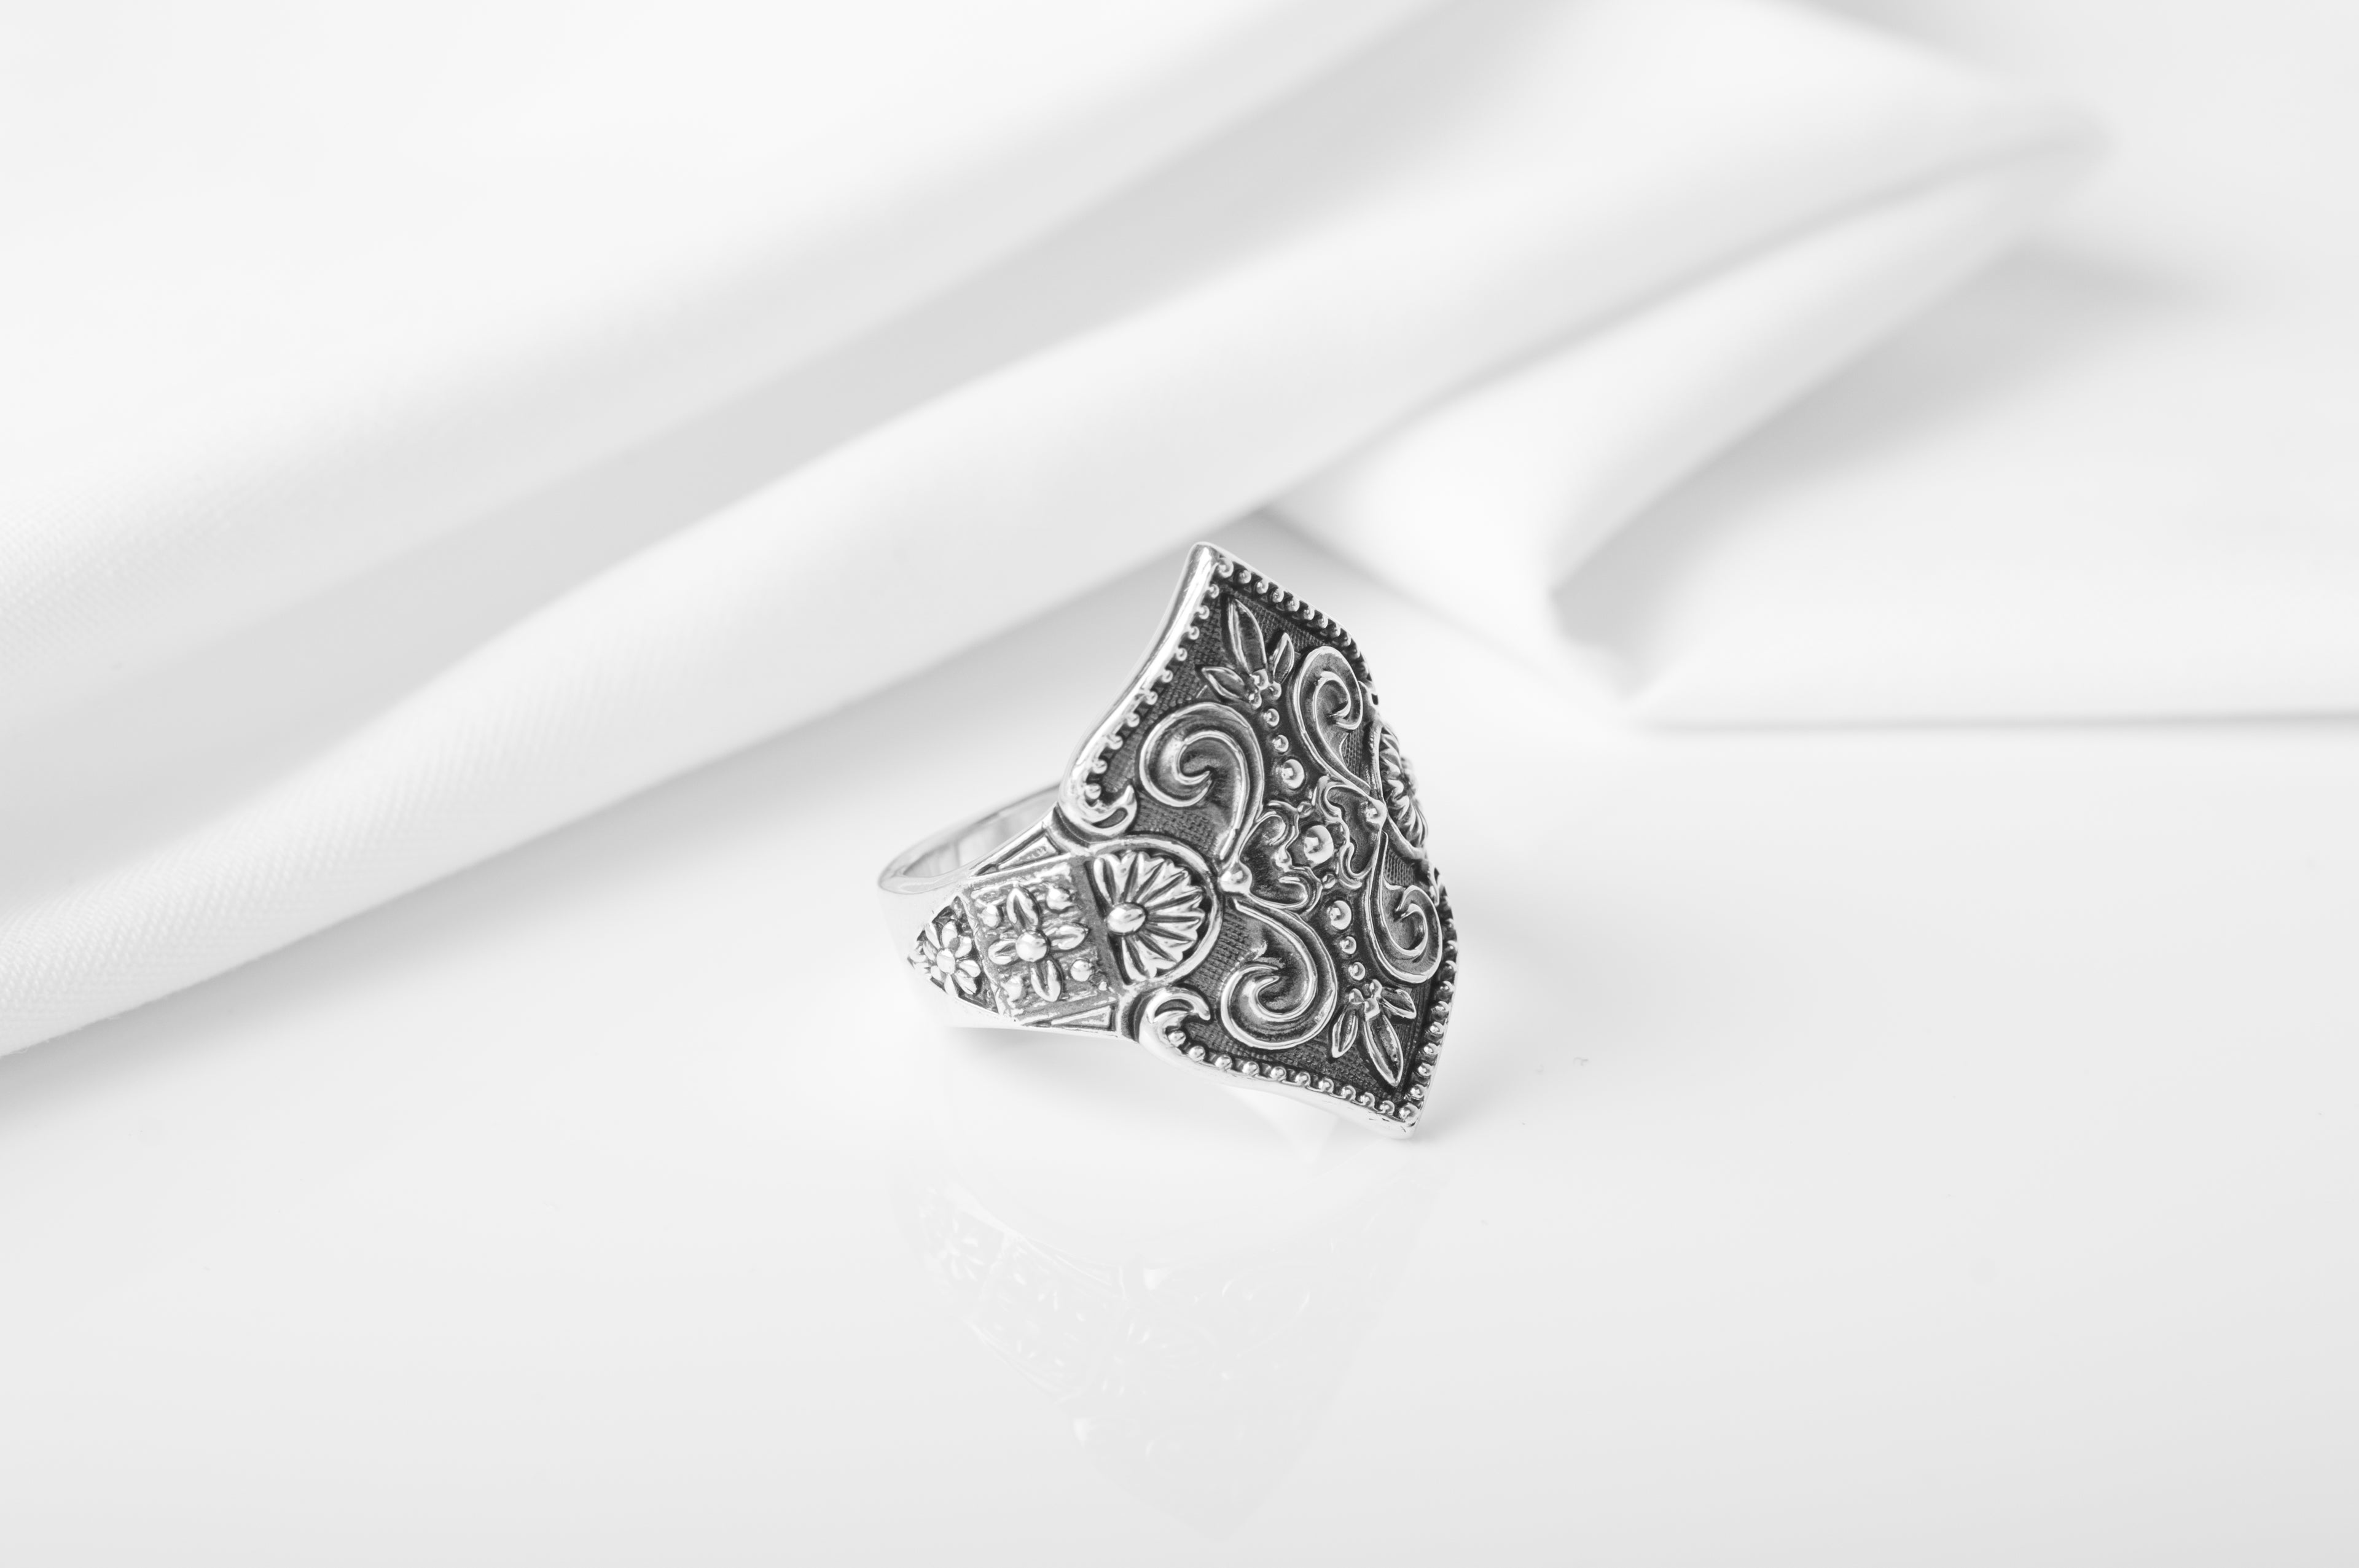 925 Silver Fashion ring with Leaves patterns, unique handcrafted jewelry